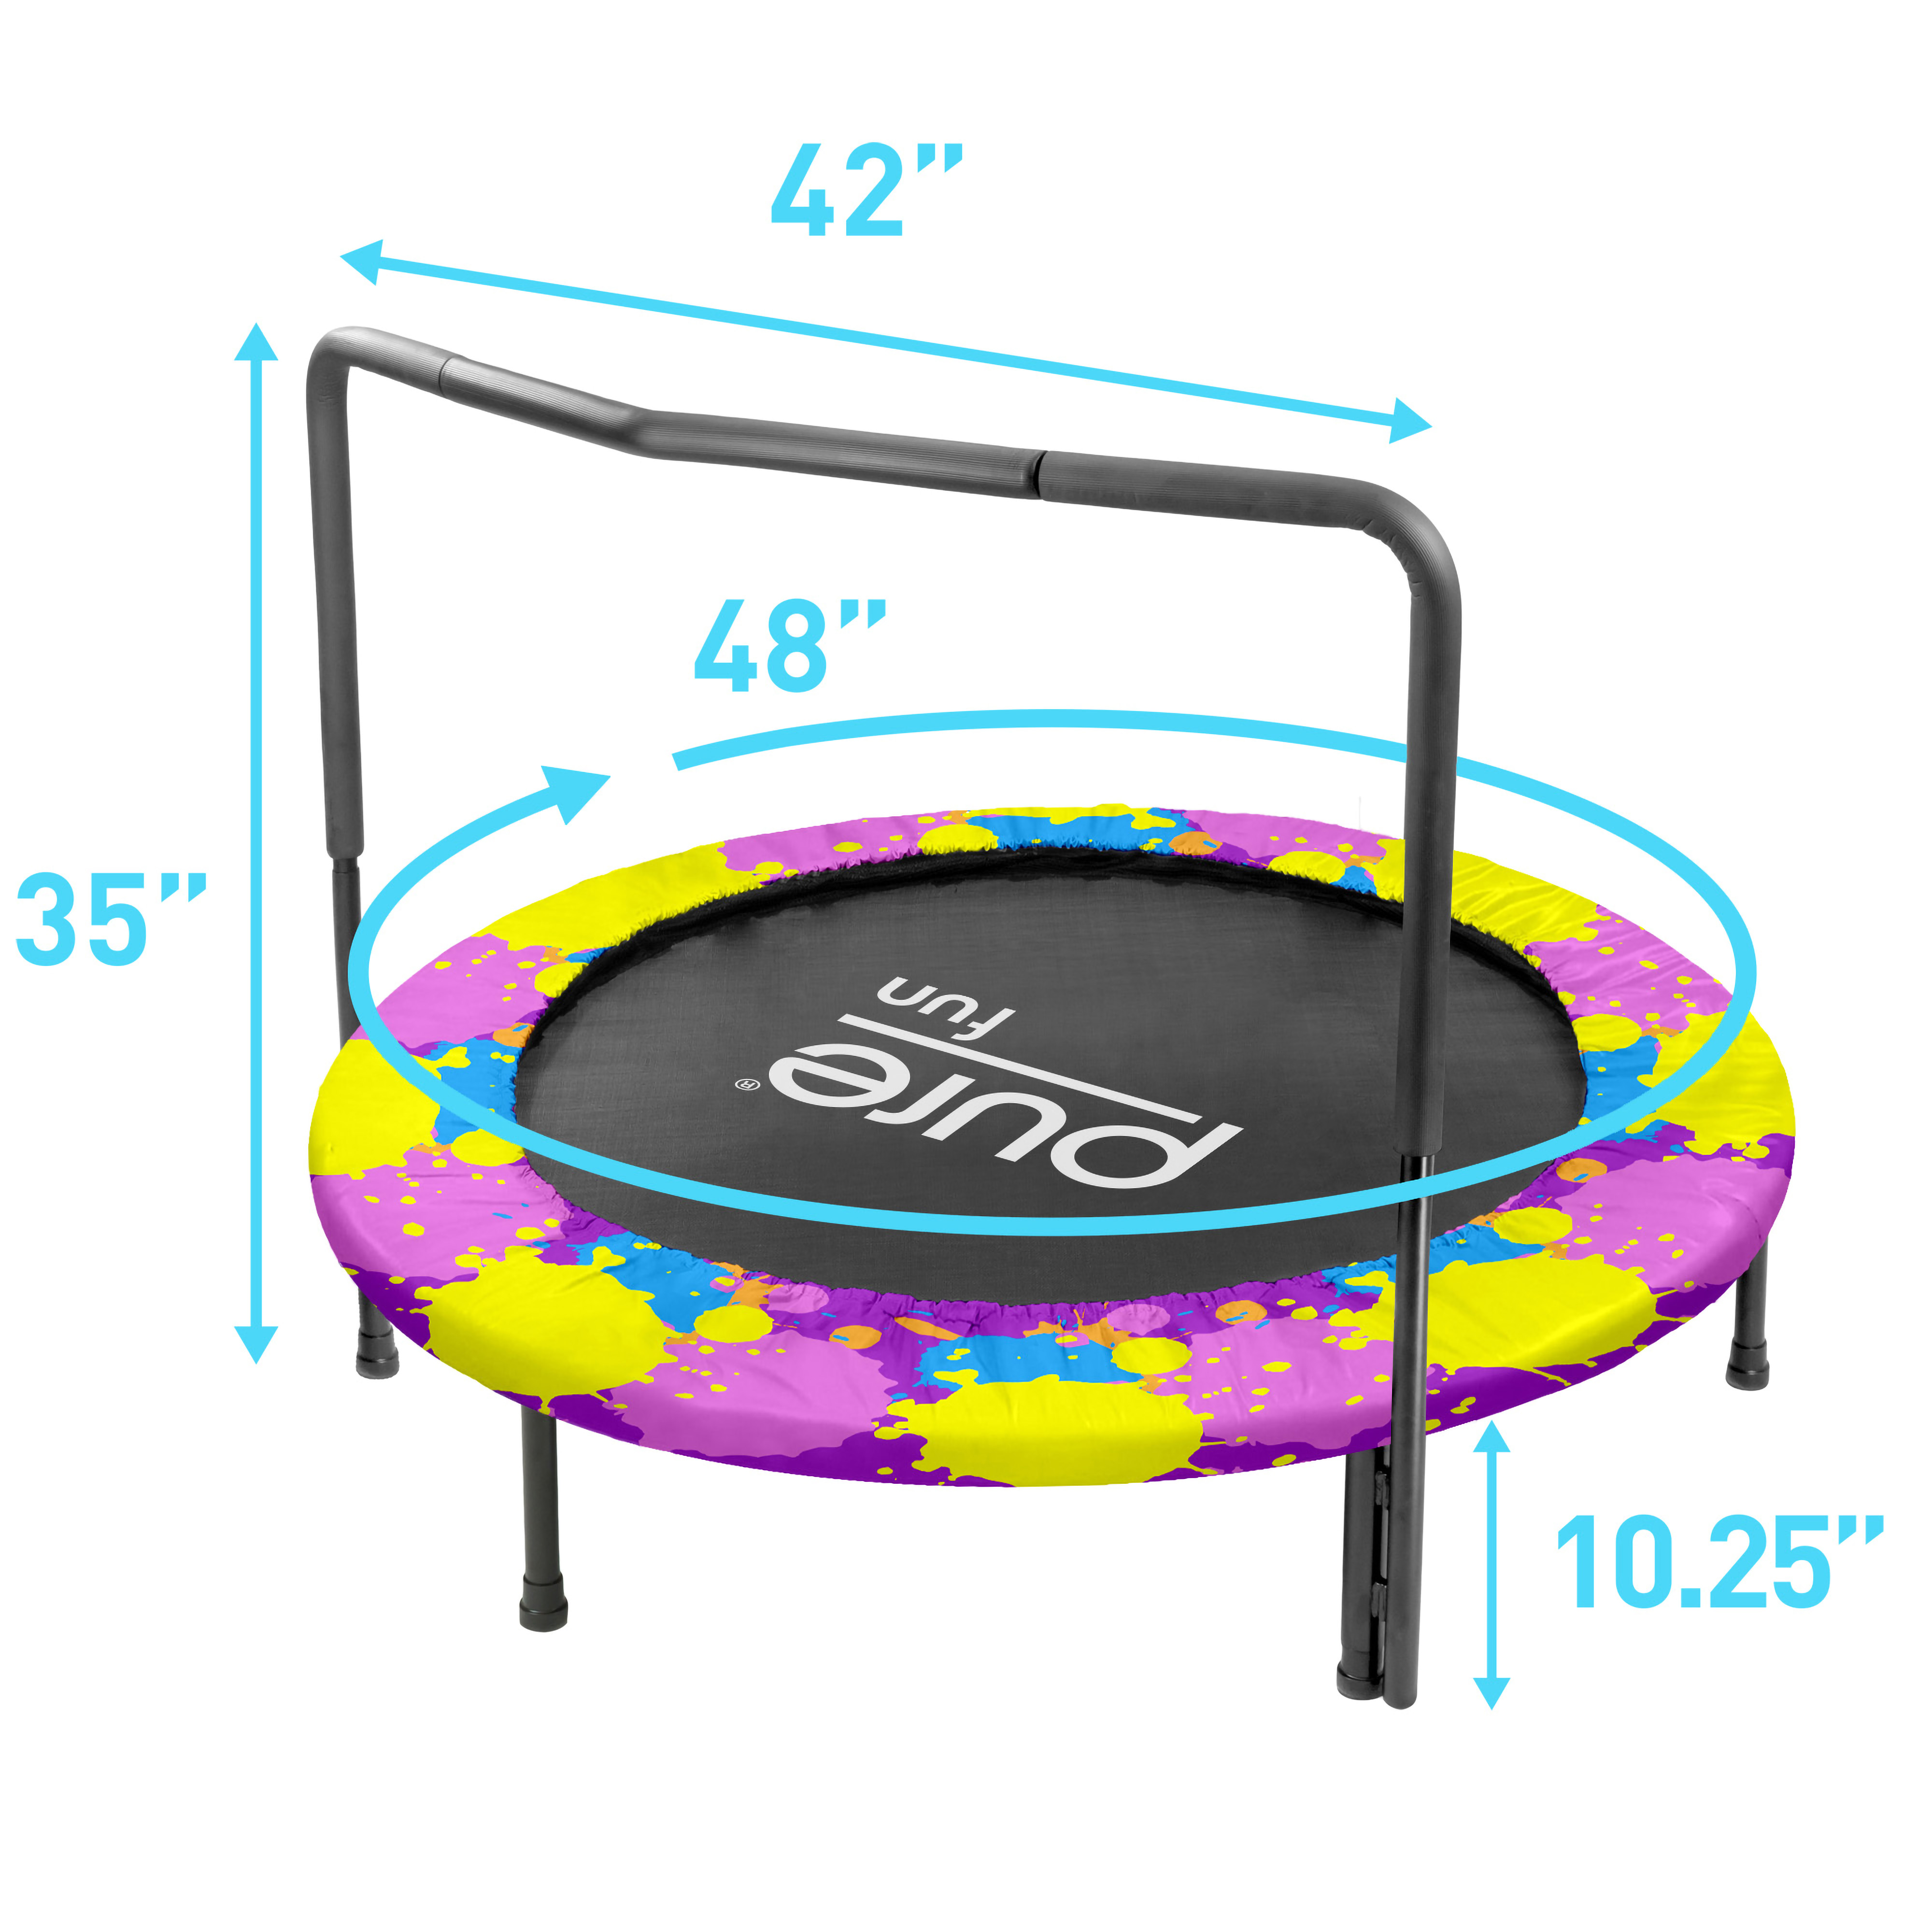 Pure Fun Super Jumper Kids 48-Inch Trampoline with Handrail, Paint - image 3 of 5